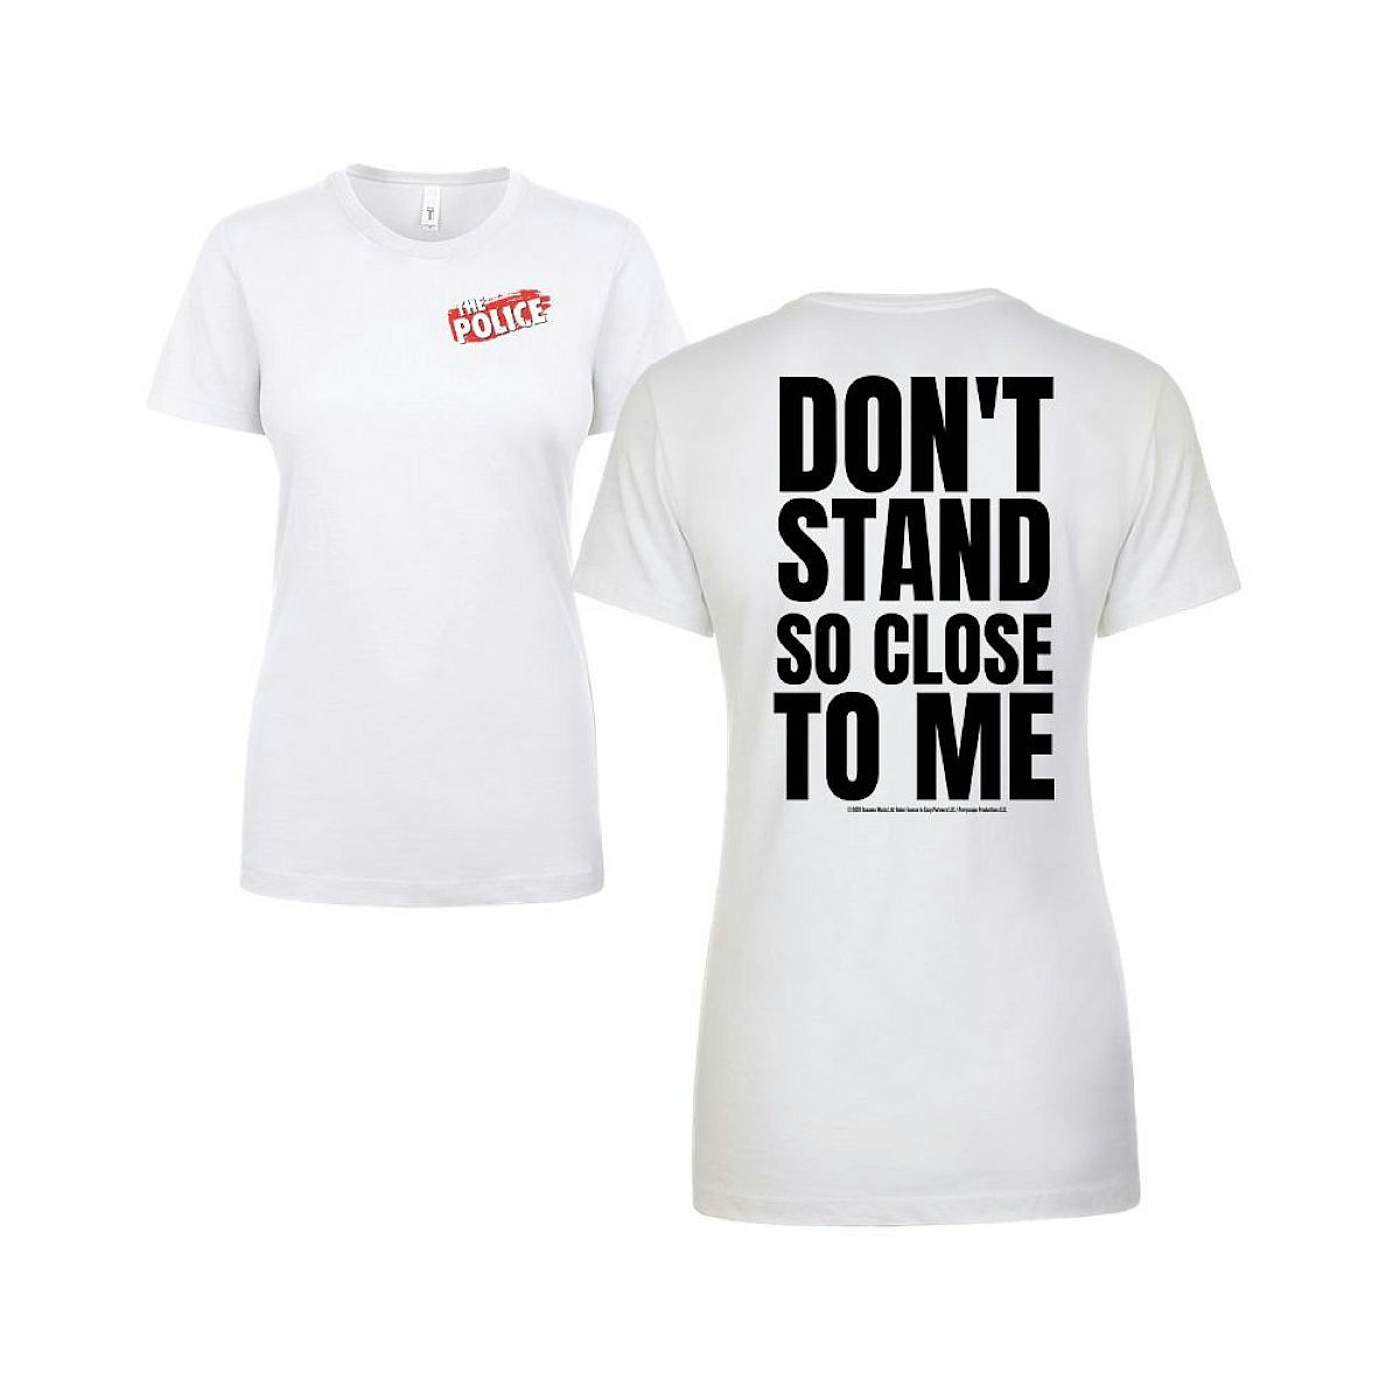 The Police Women's Don't Stand So Close To Me 2-Sided T-Shirt